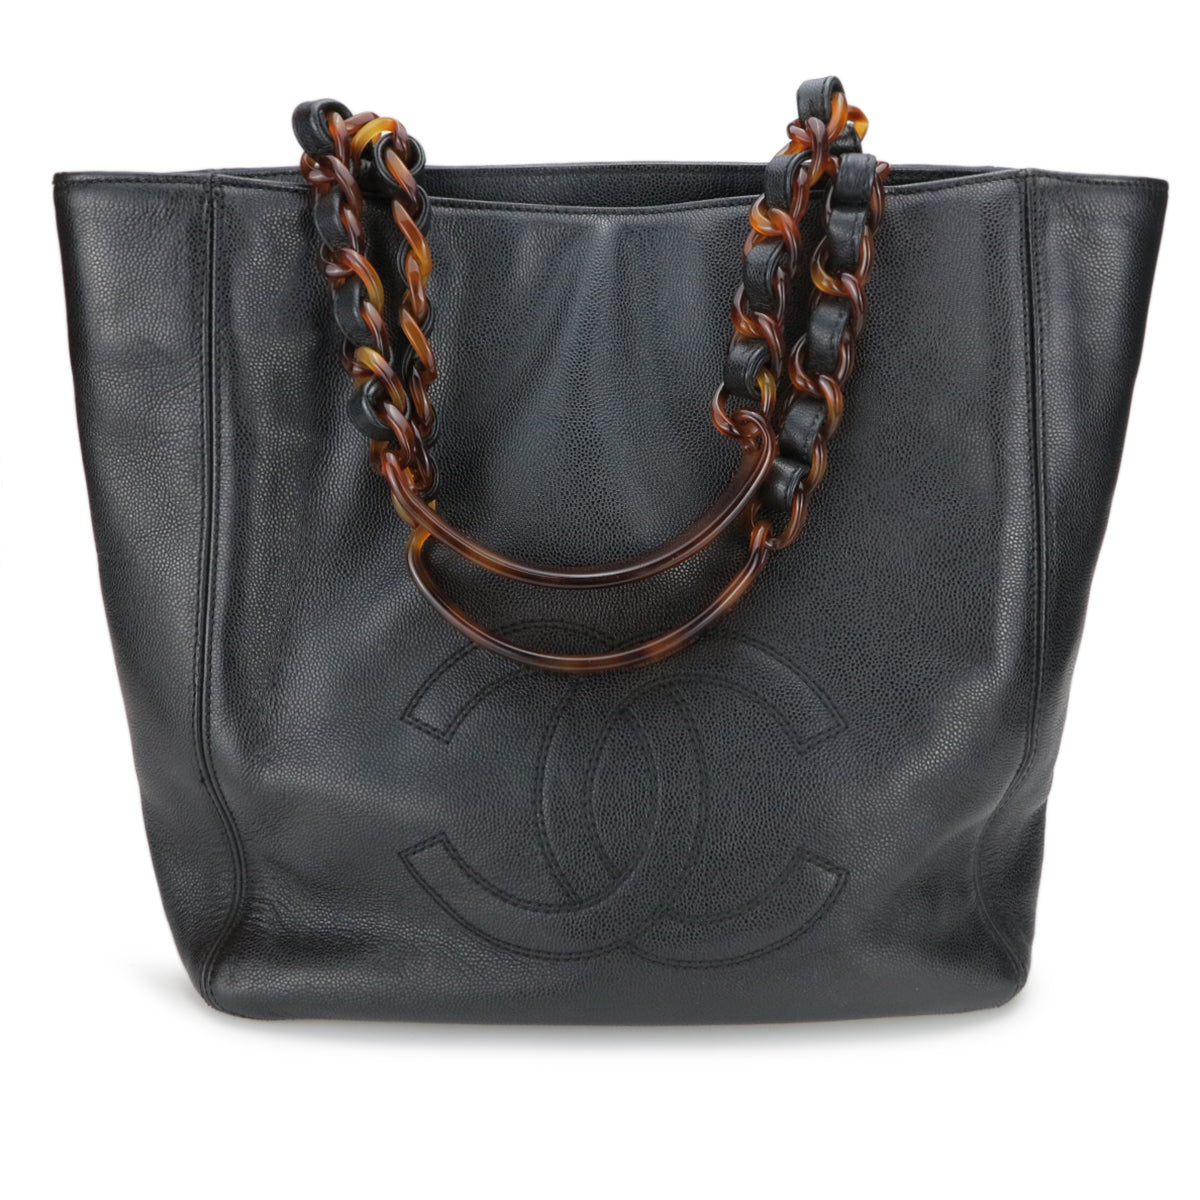 CHANEL Vintage Small Shopping Tote with Tortoise Handle in Black Caviar